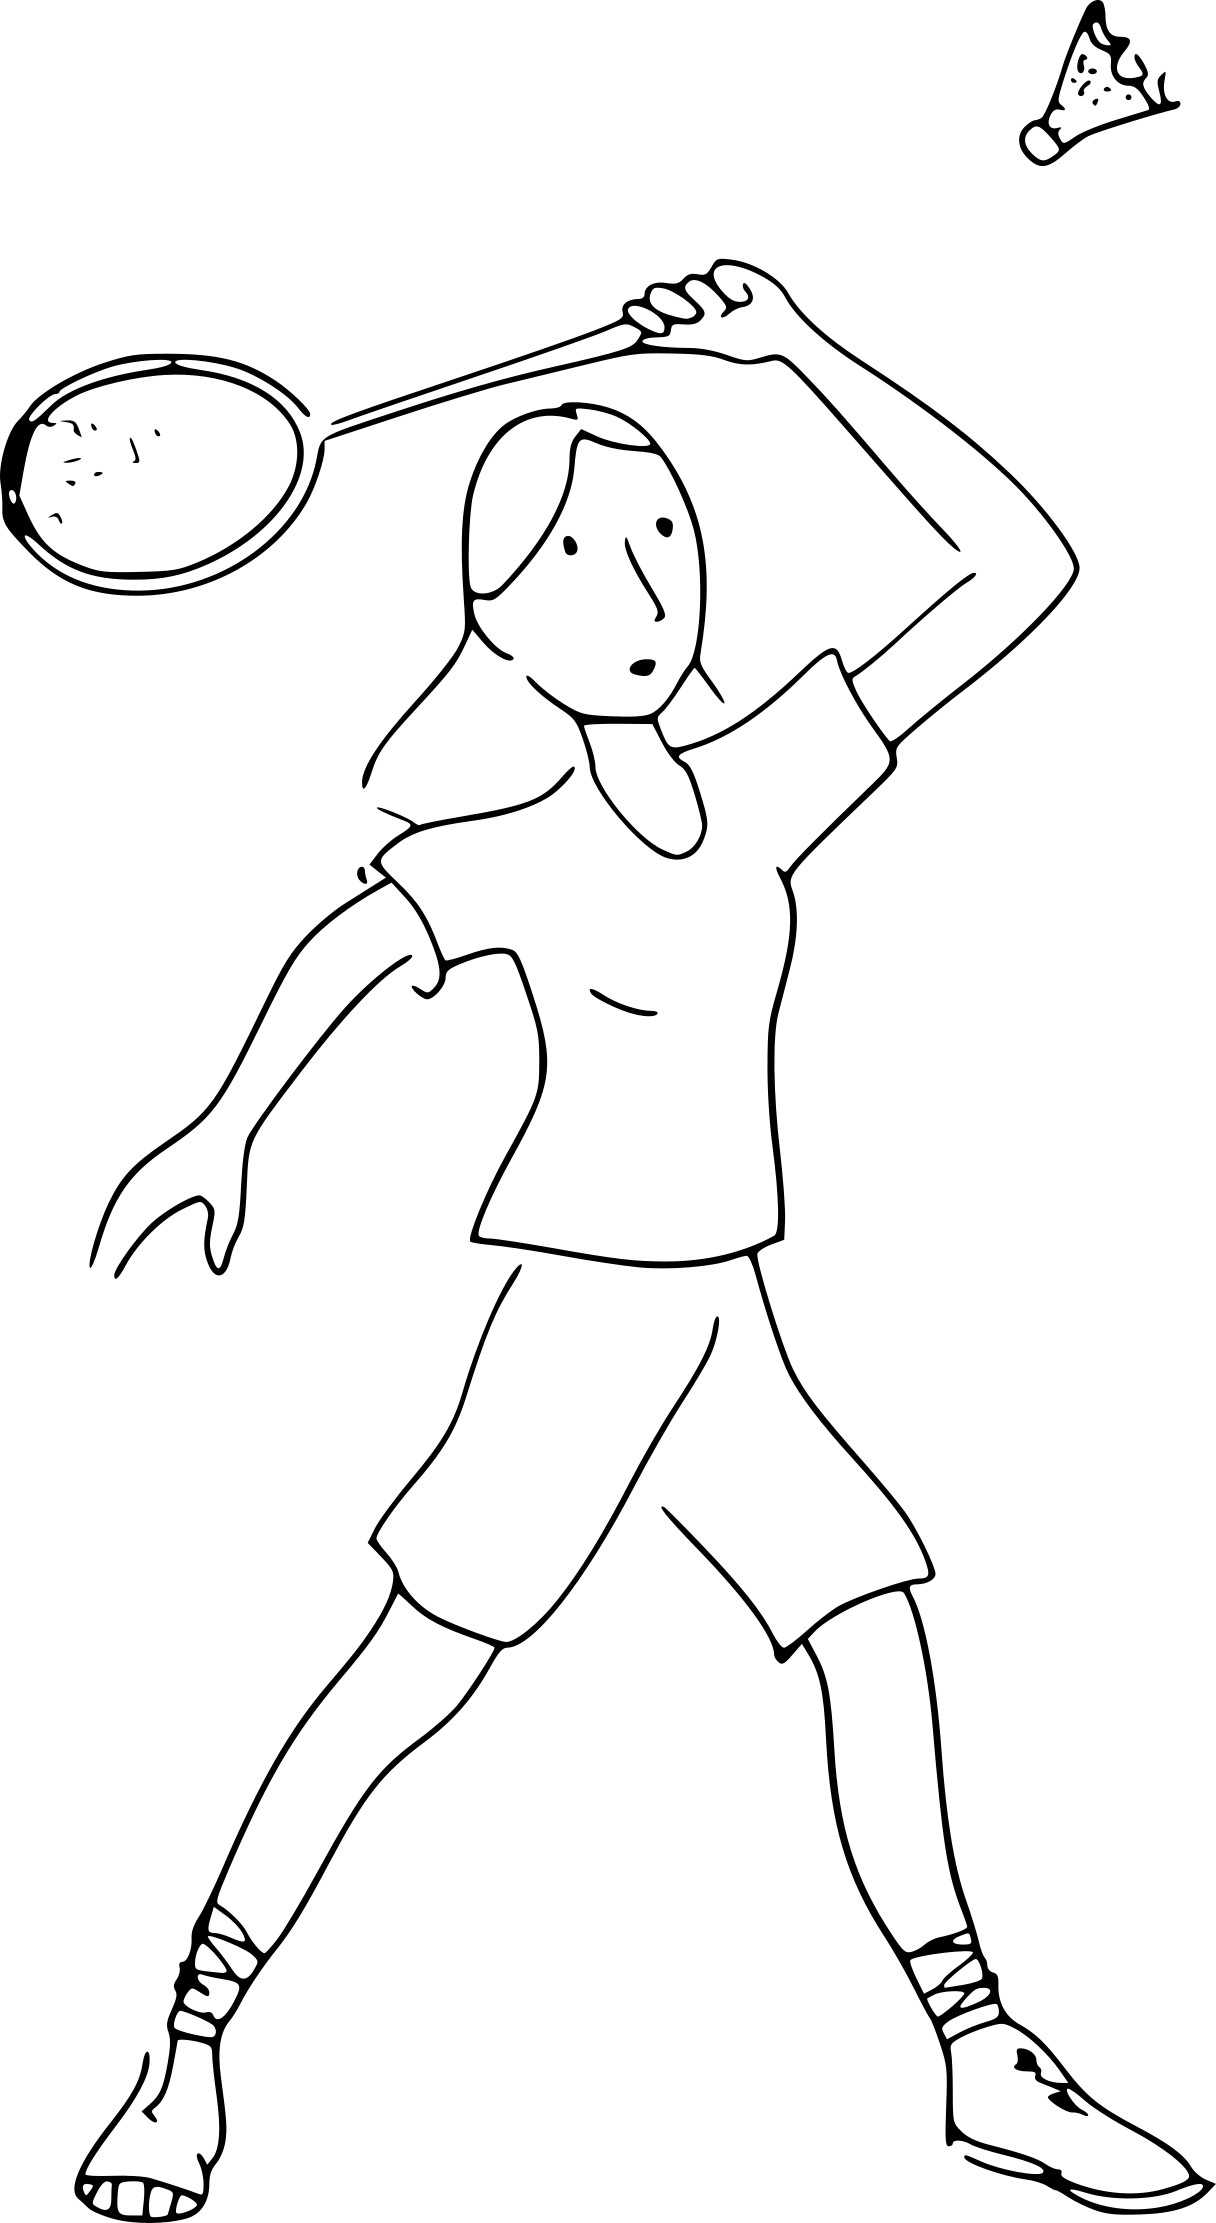 Badminton coloring page - free printable coloring pages on coloori.com